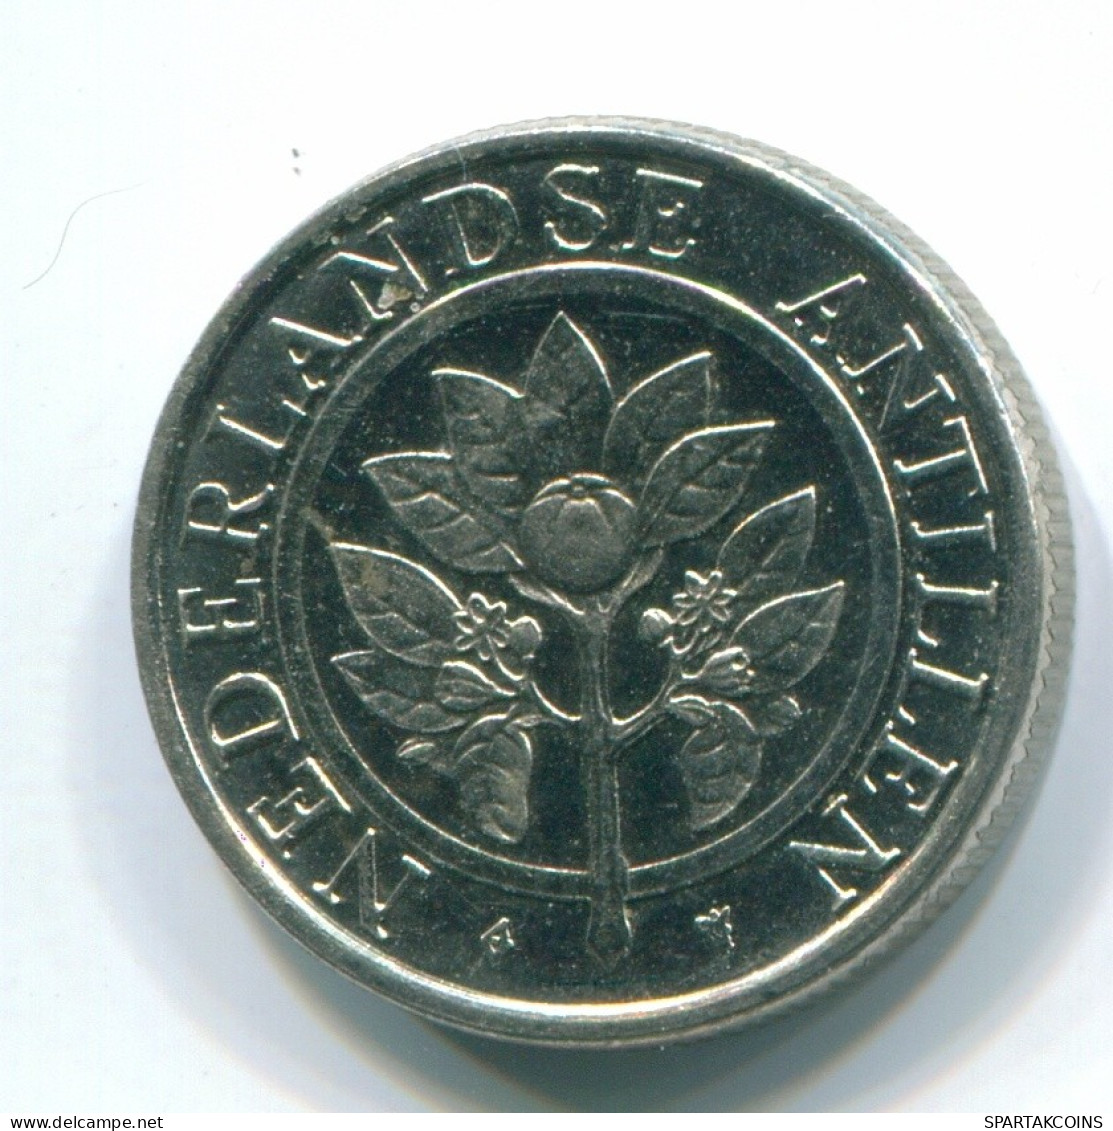 10 CENTS 1989 NETHERLANDS ANTILLES Nickel Colonial Coin #S11313.U.A - Antille Olandesi